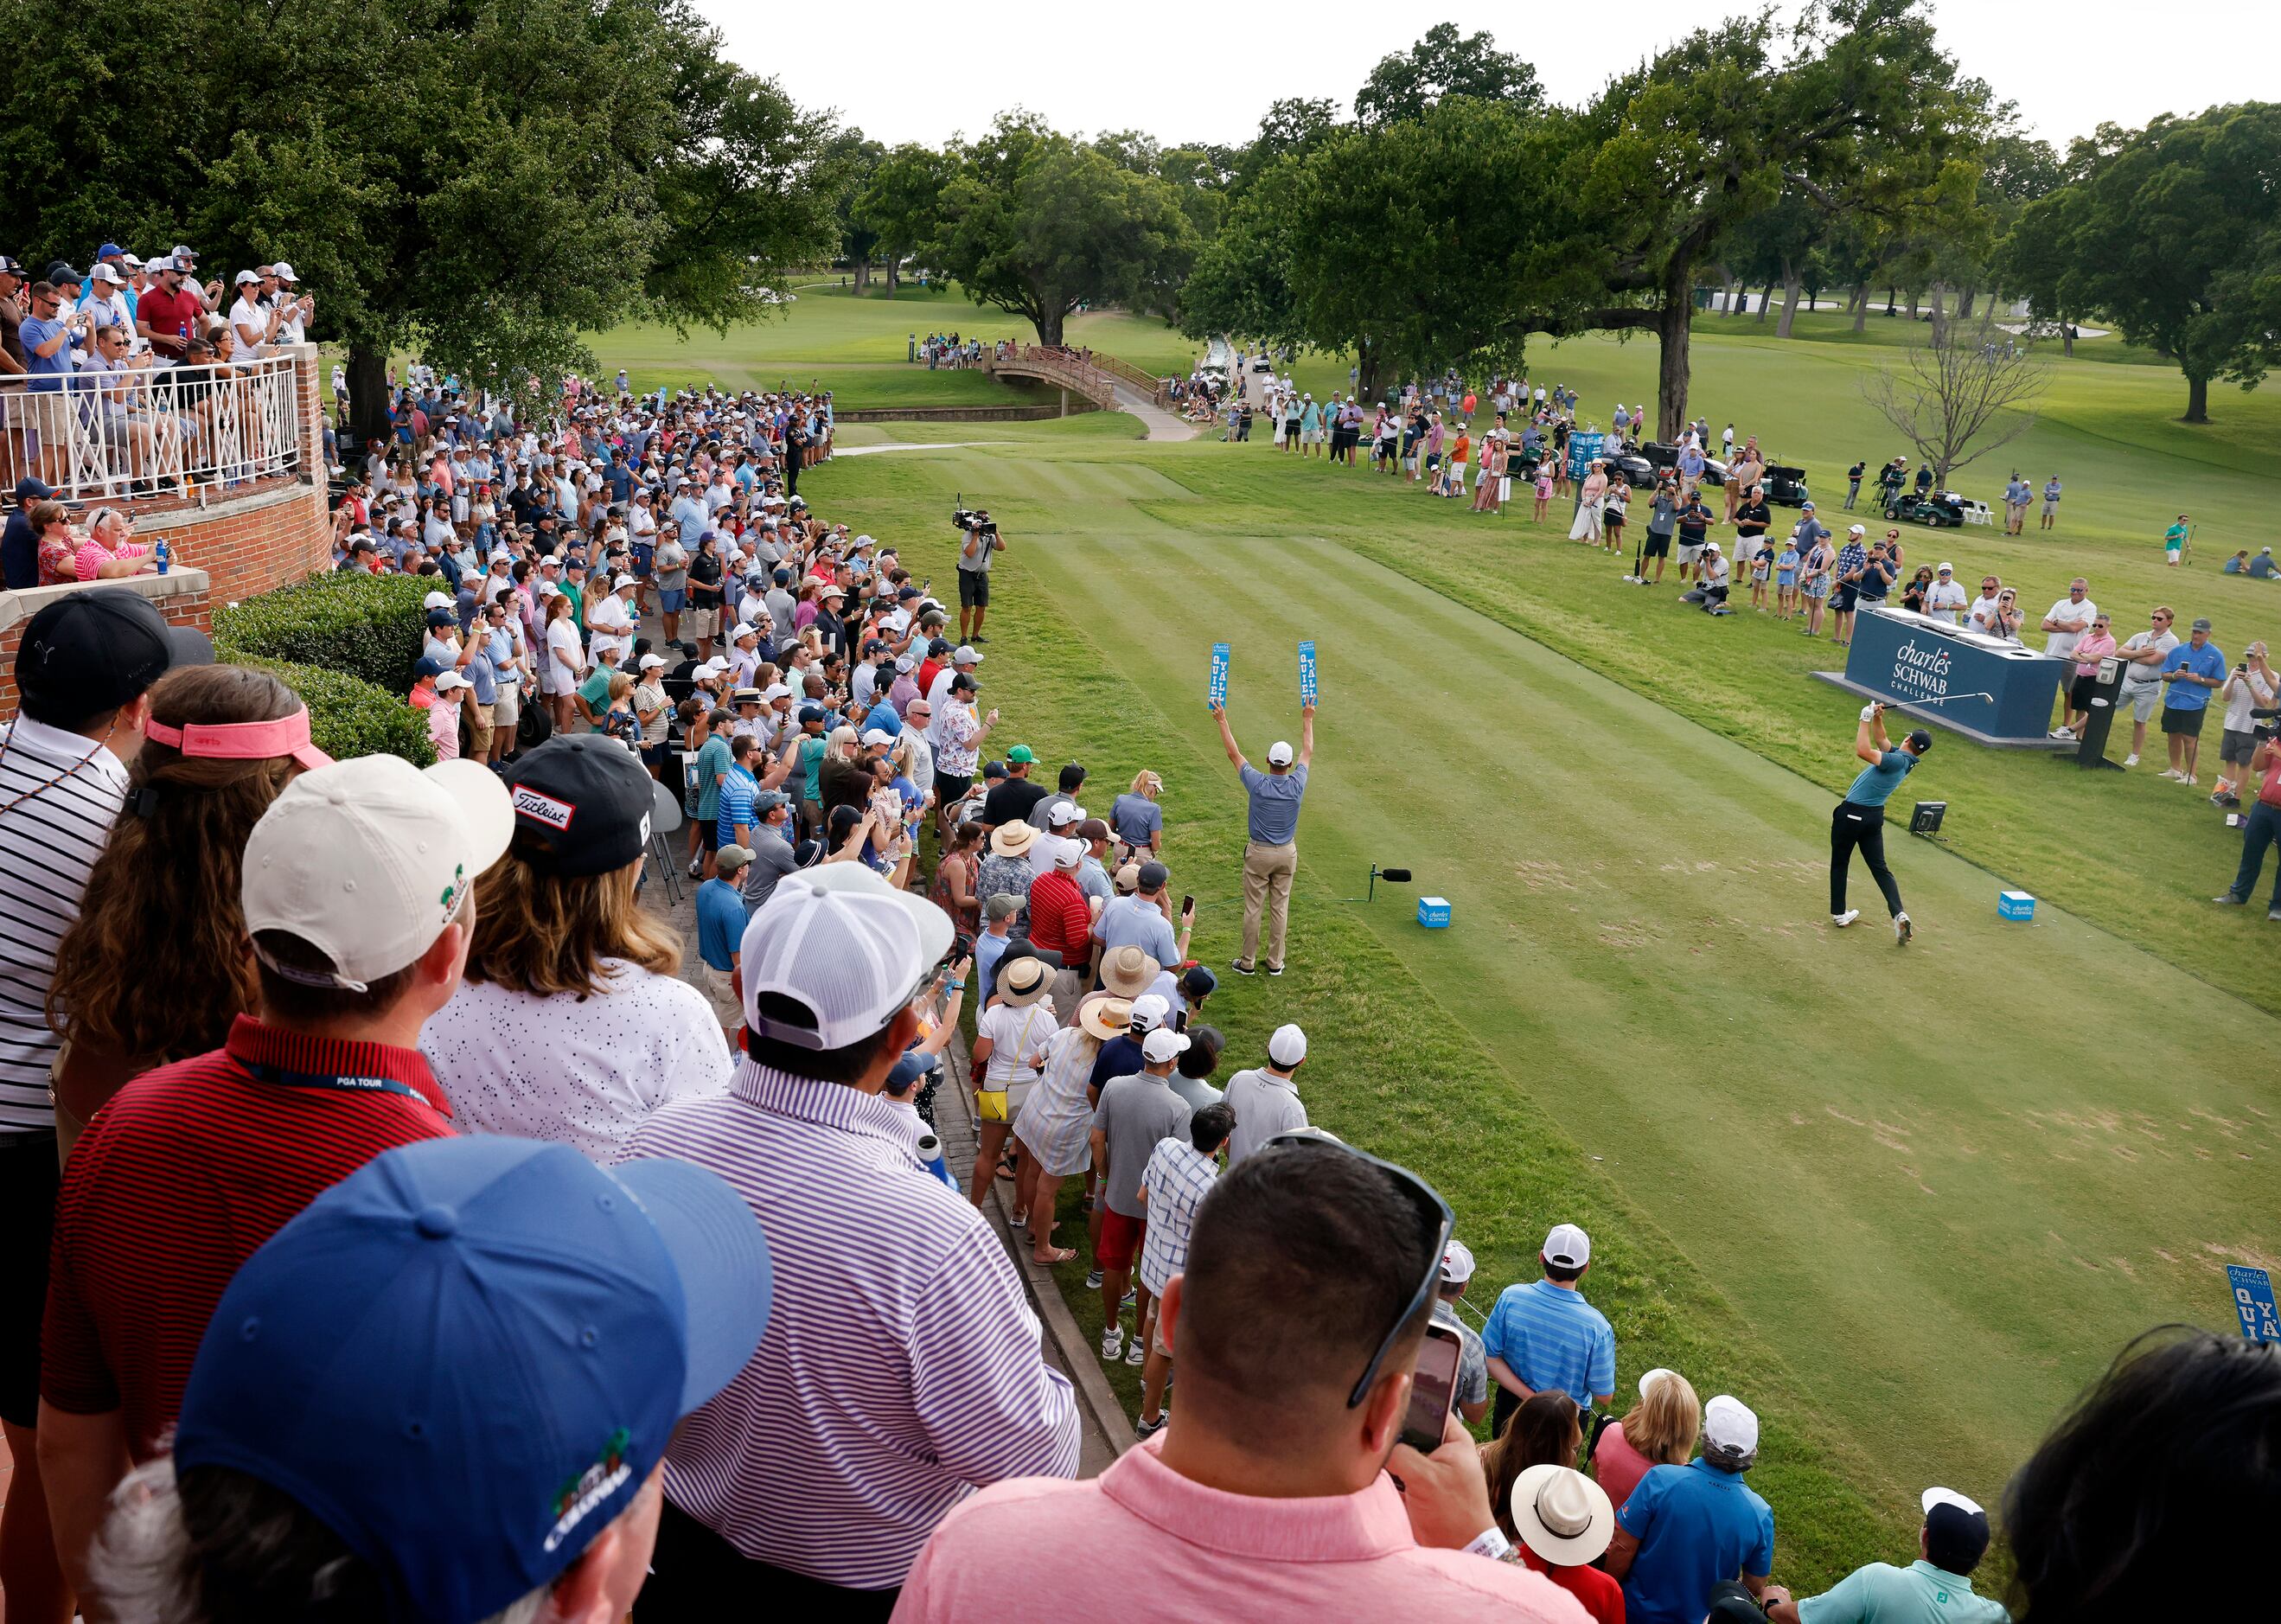 With a gallery of onlookers, professional golfer Jordan Spieth tees off on No. 17 during his...